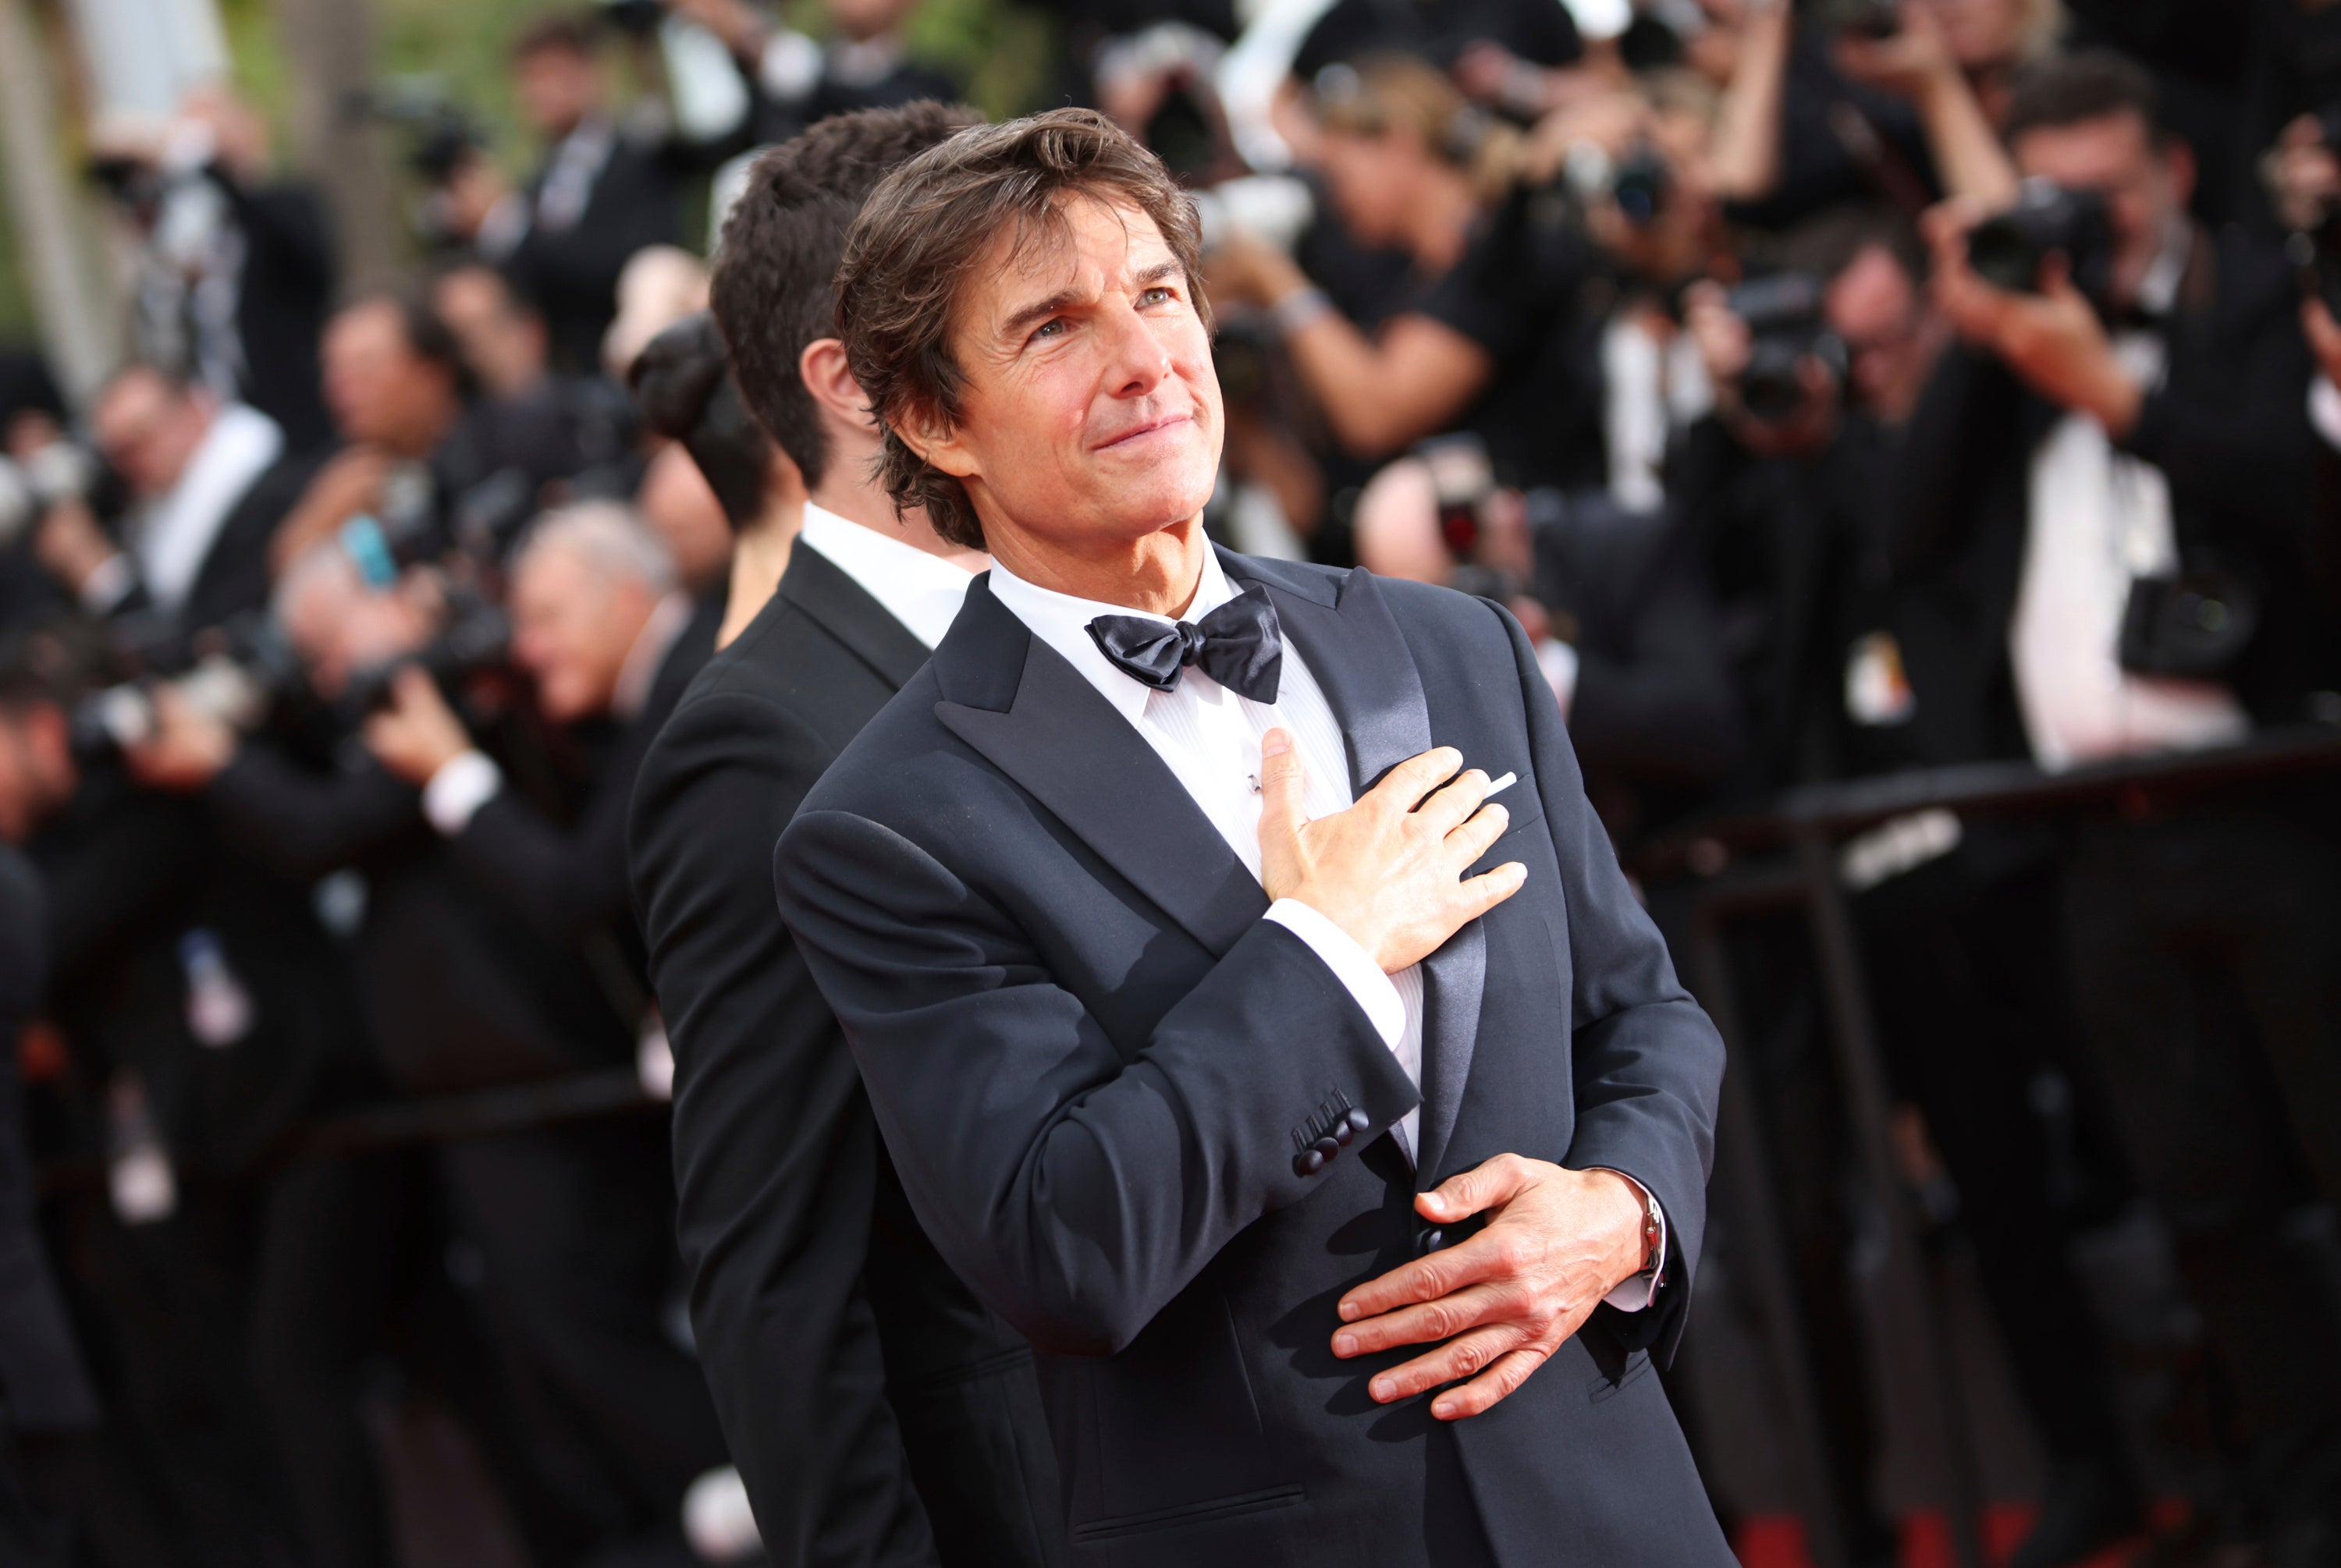 Tom Cruise at the Cannes Film Festival to promote ‘Top Gun: Maverick’